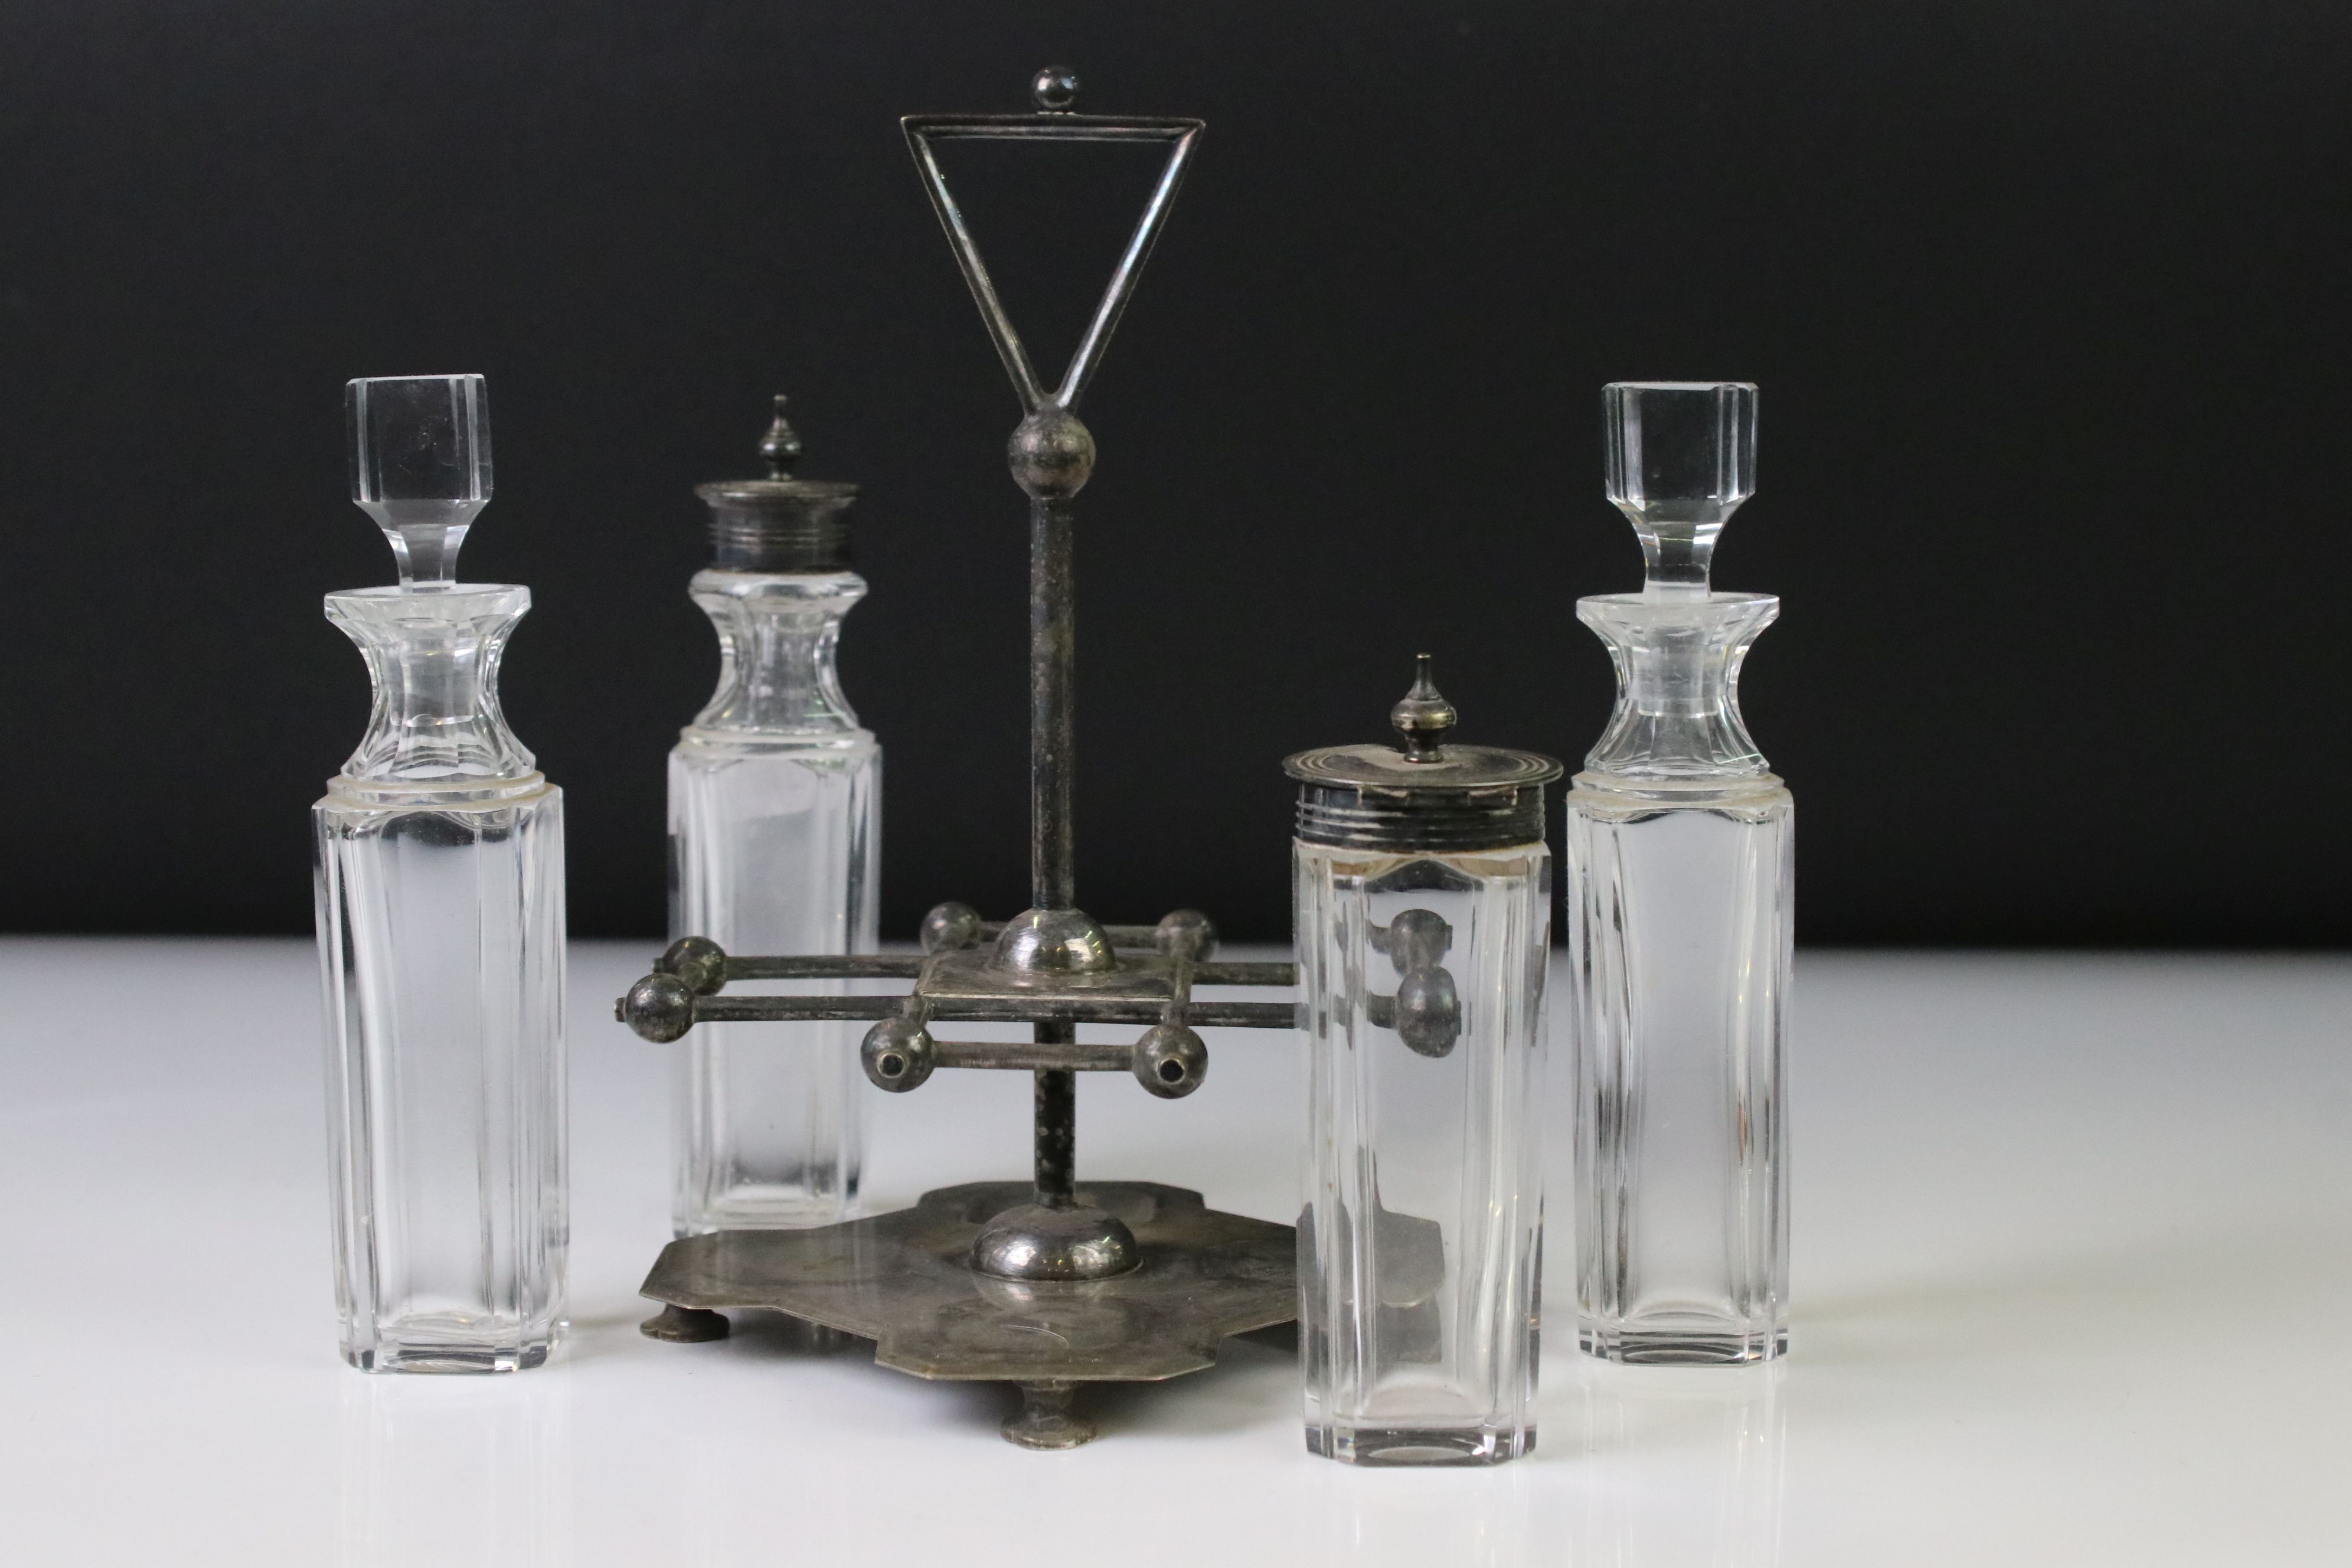 Hukin & Heath silver plate and clear cut crystal glass four piece cruet set on stand, after a design - Image 4 of 7